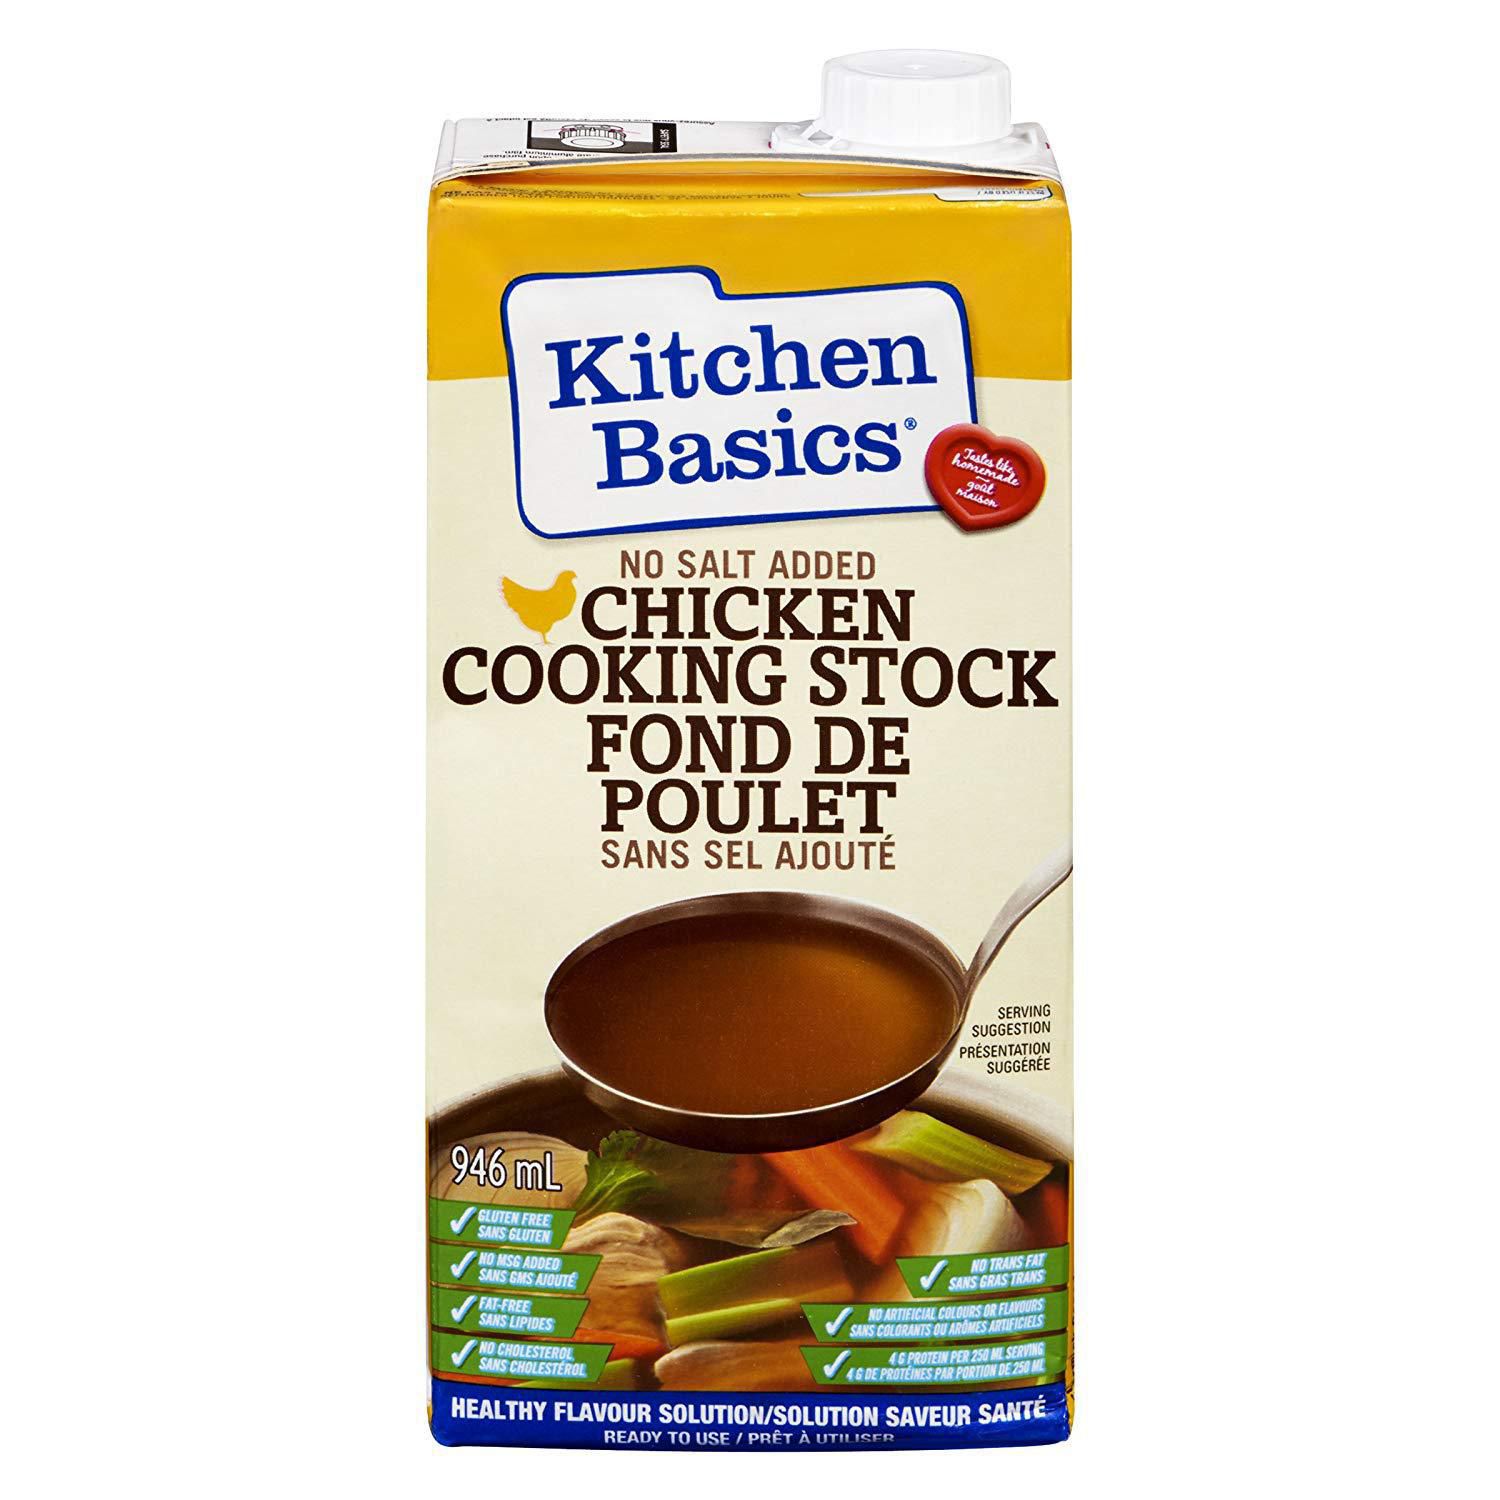 Kitchen Basics Original, Healthy Flavour Solution, Ready To Use ...